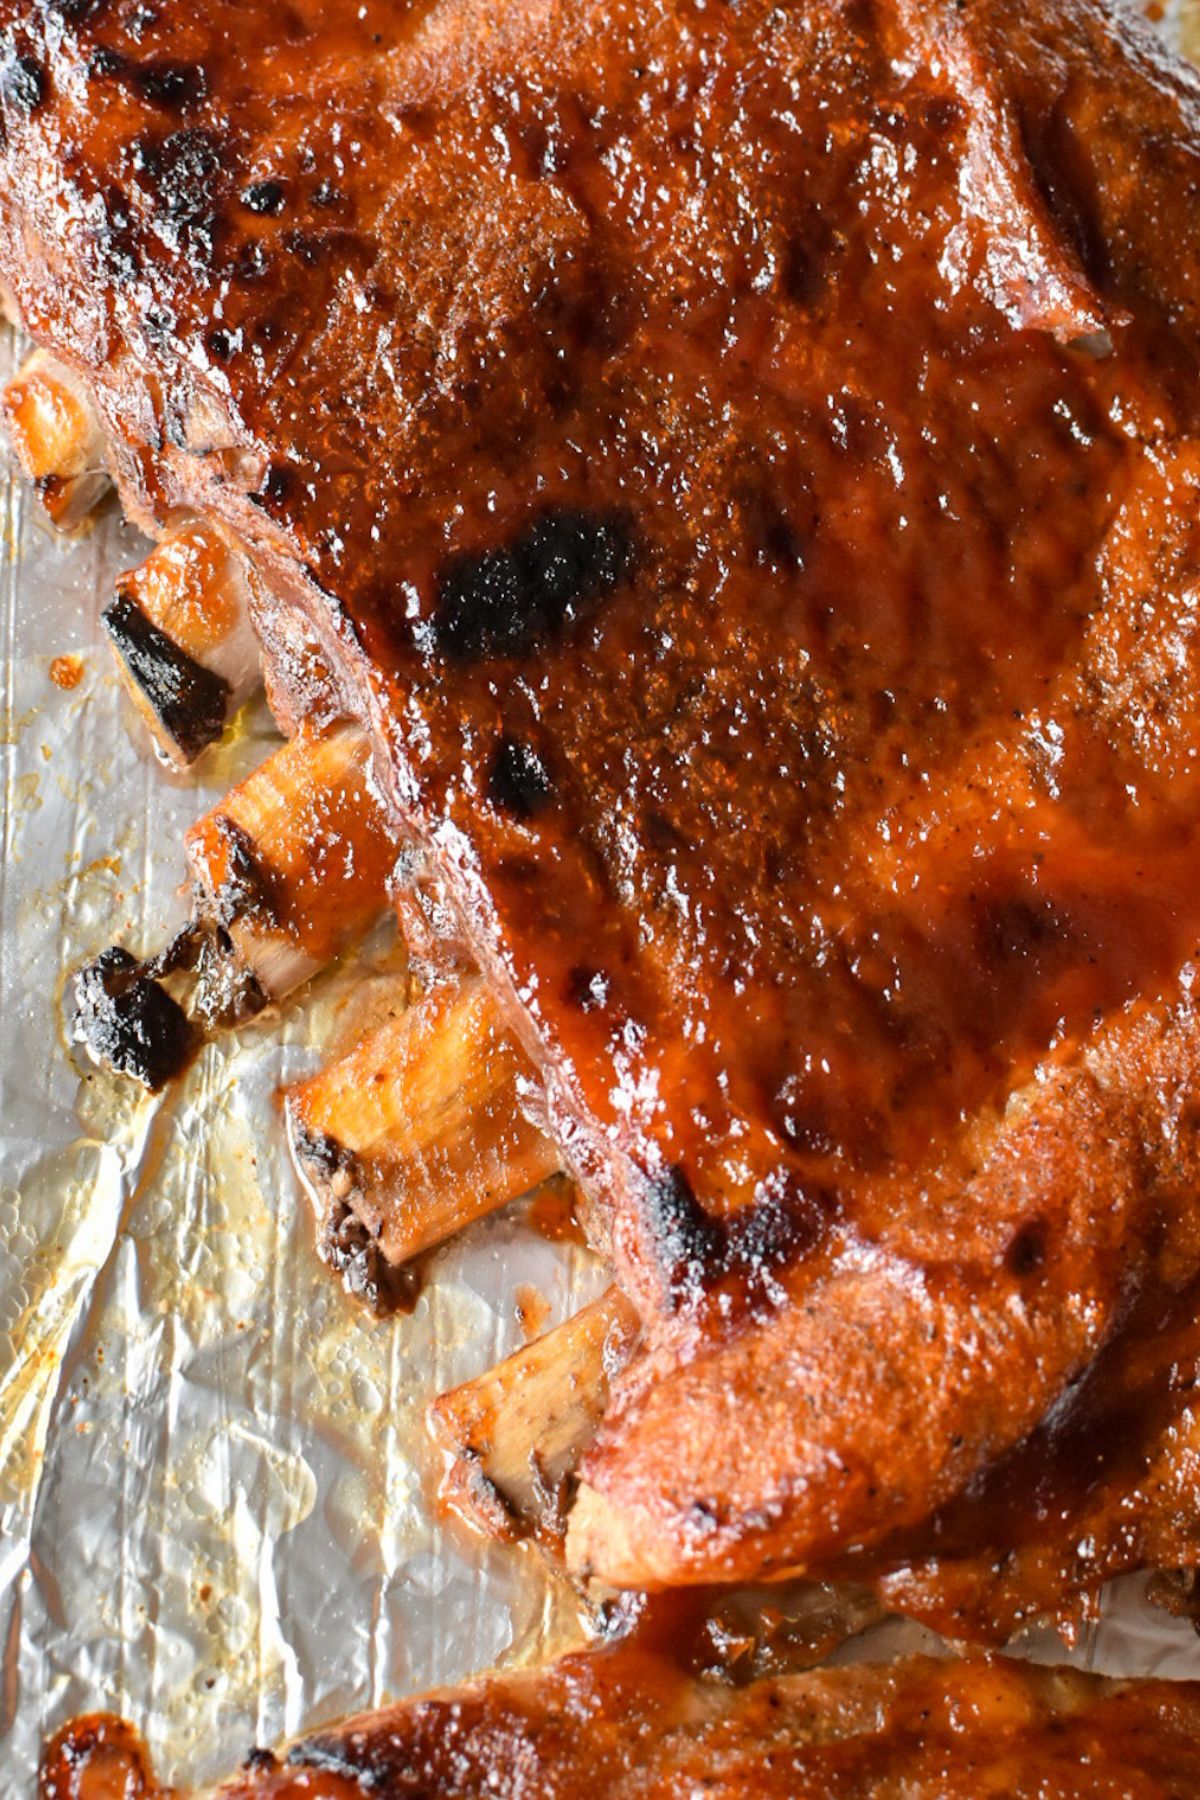 A close-up of the cooked rib meat pulling away from the end of the rib bones.